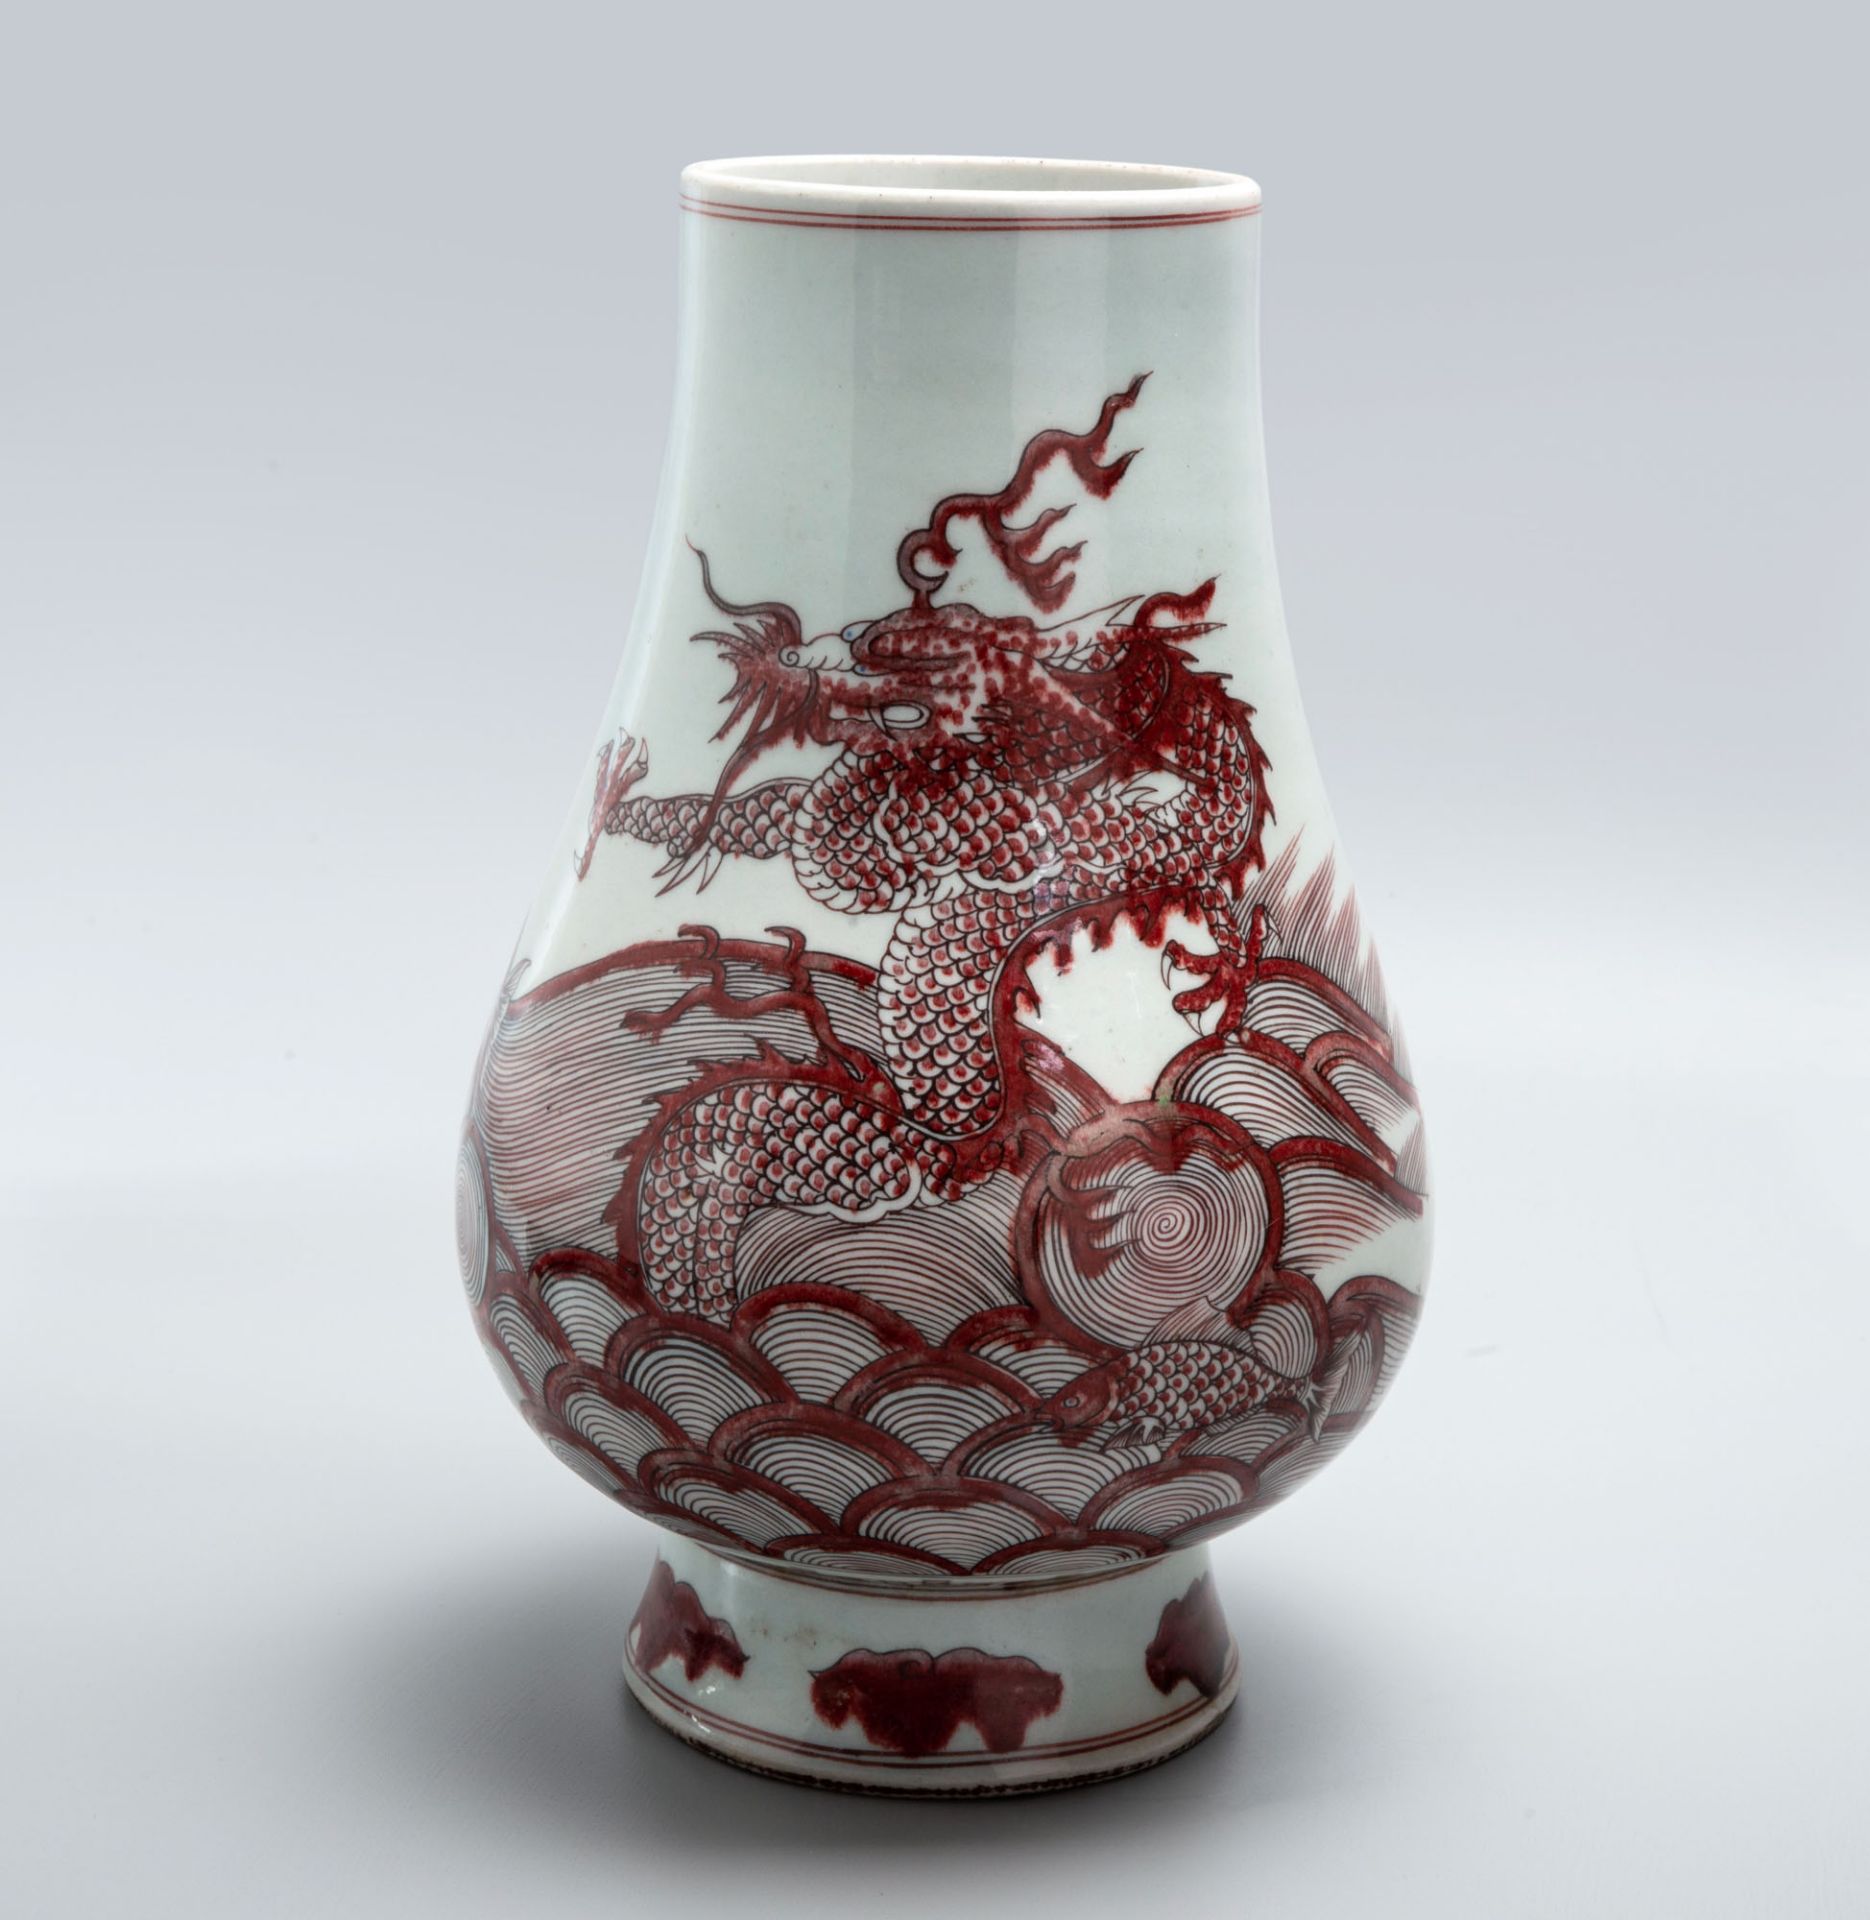 A Fine White and Copper Red Chinese Porcelain Vase, China, Qing Dynasty Kangxi mark